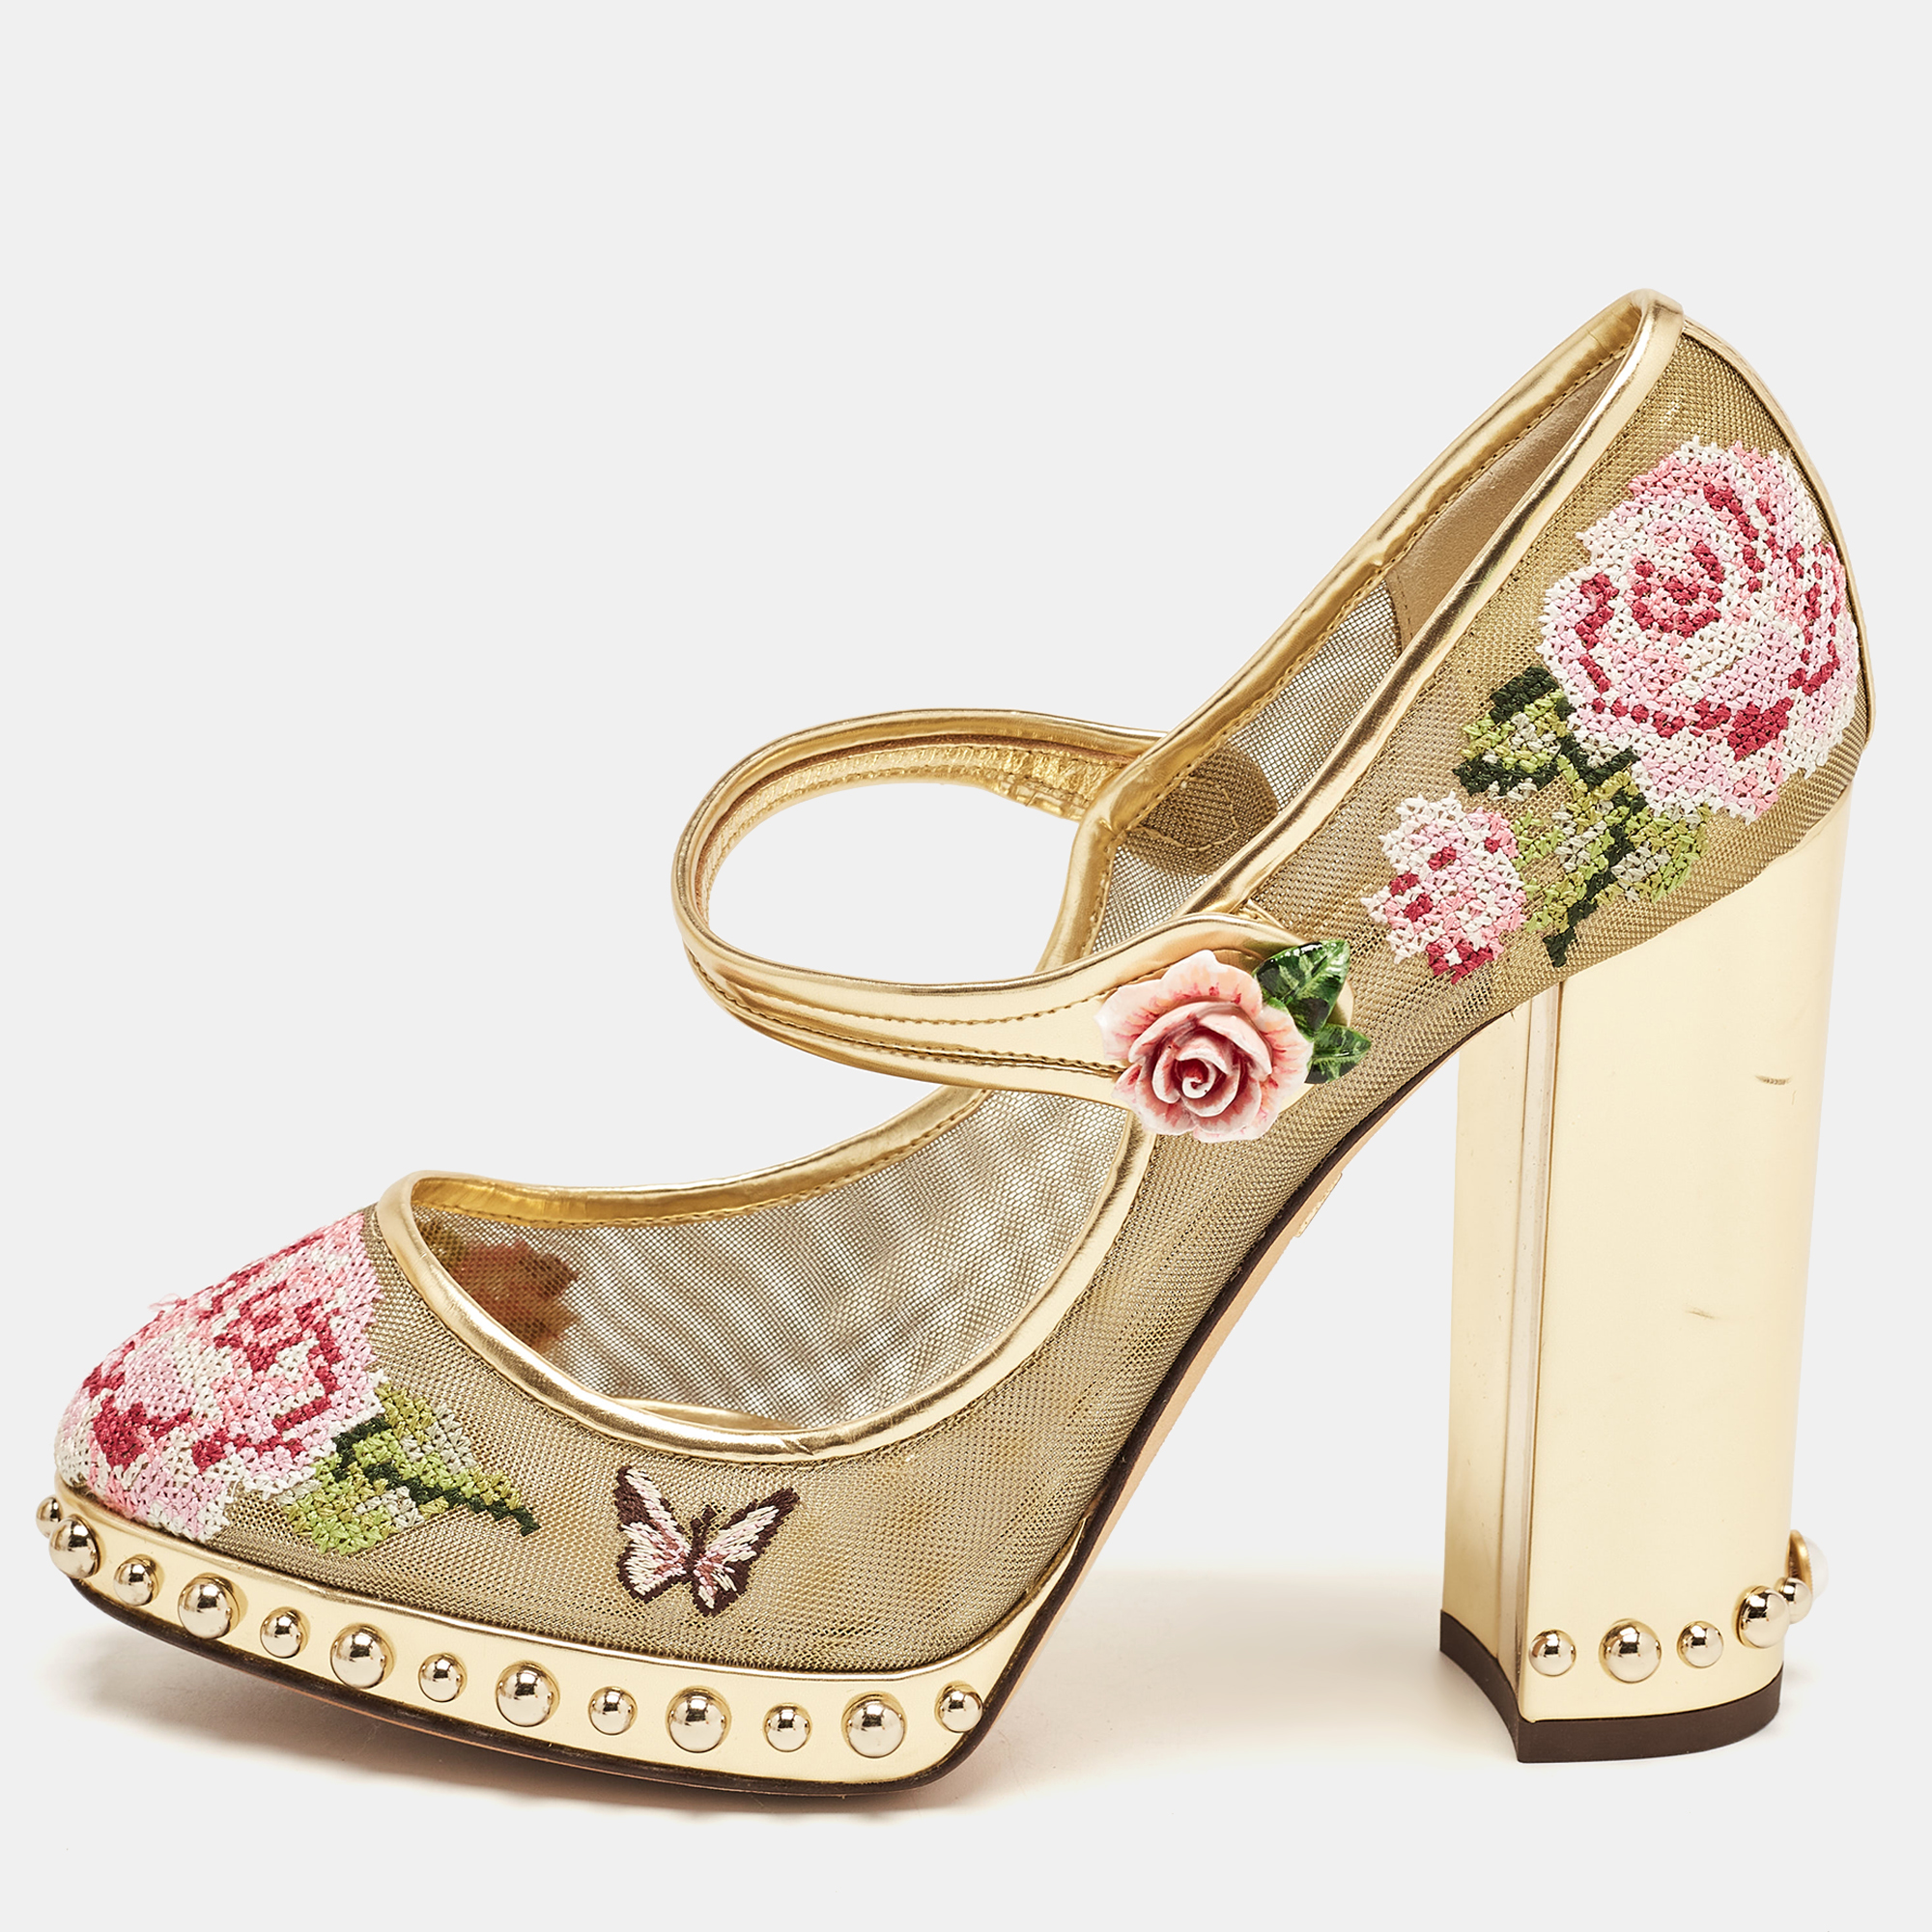 Dolce & Gabbana Gold Mesh And Leather Floral Print Studded Accents Mary Jane Block Heel Pumps Size 40